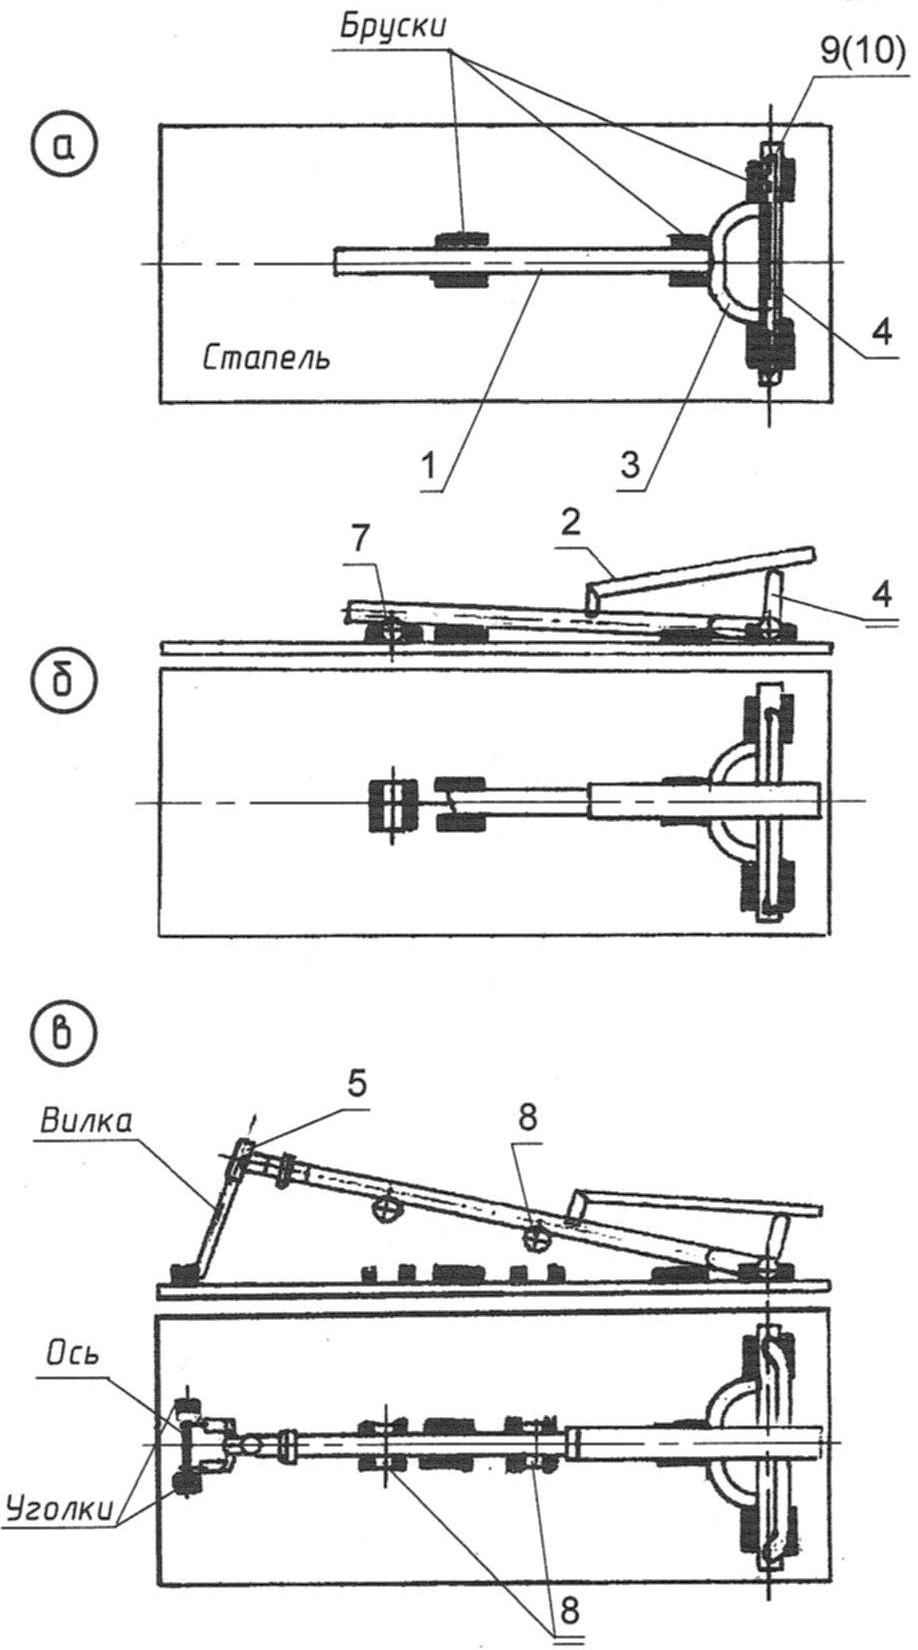 Sequence Assembly (welding) of parts of the frame on the stocks